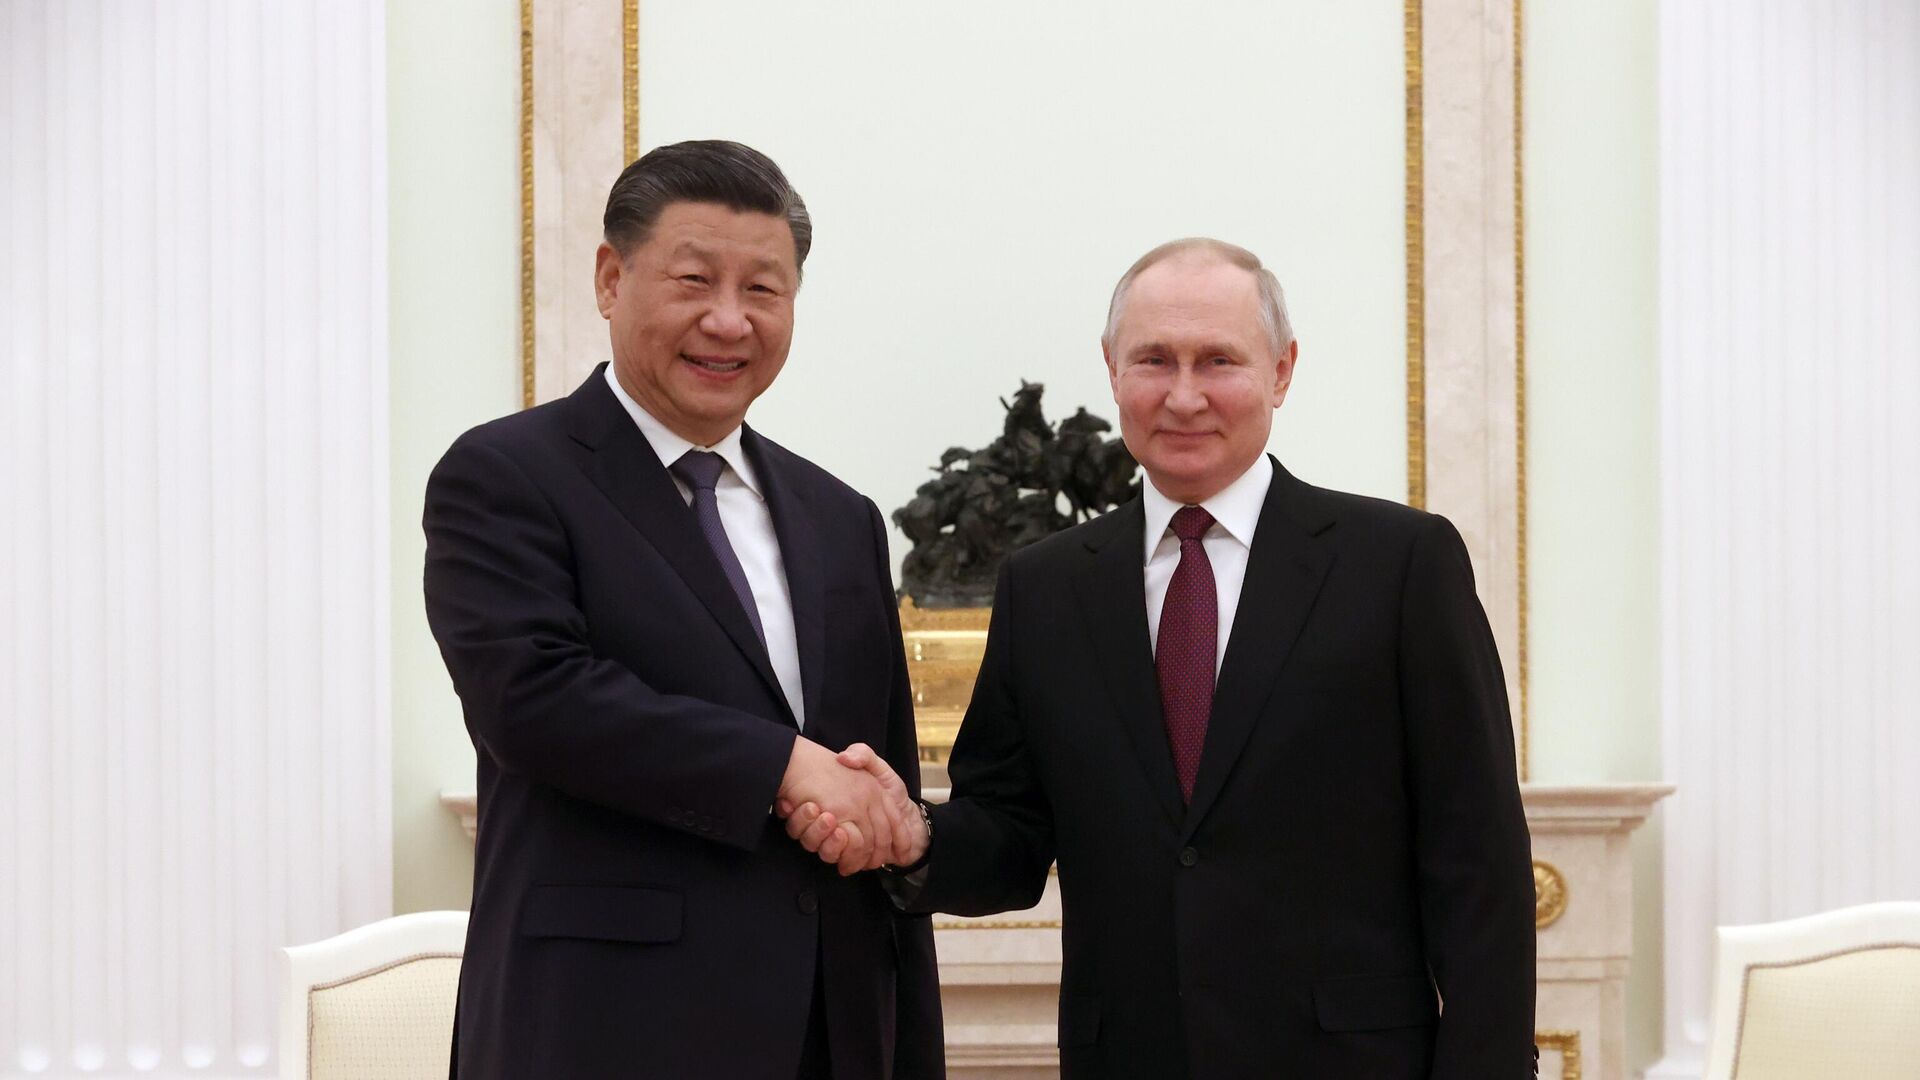 Chinese President Xi Jinping and Russian President Vladimir Putin shake hands during their meeting at the Kremlin in Moscow, Russia. - Sputnik International, 1920, 20.03.2023